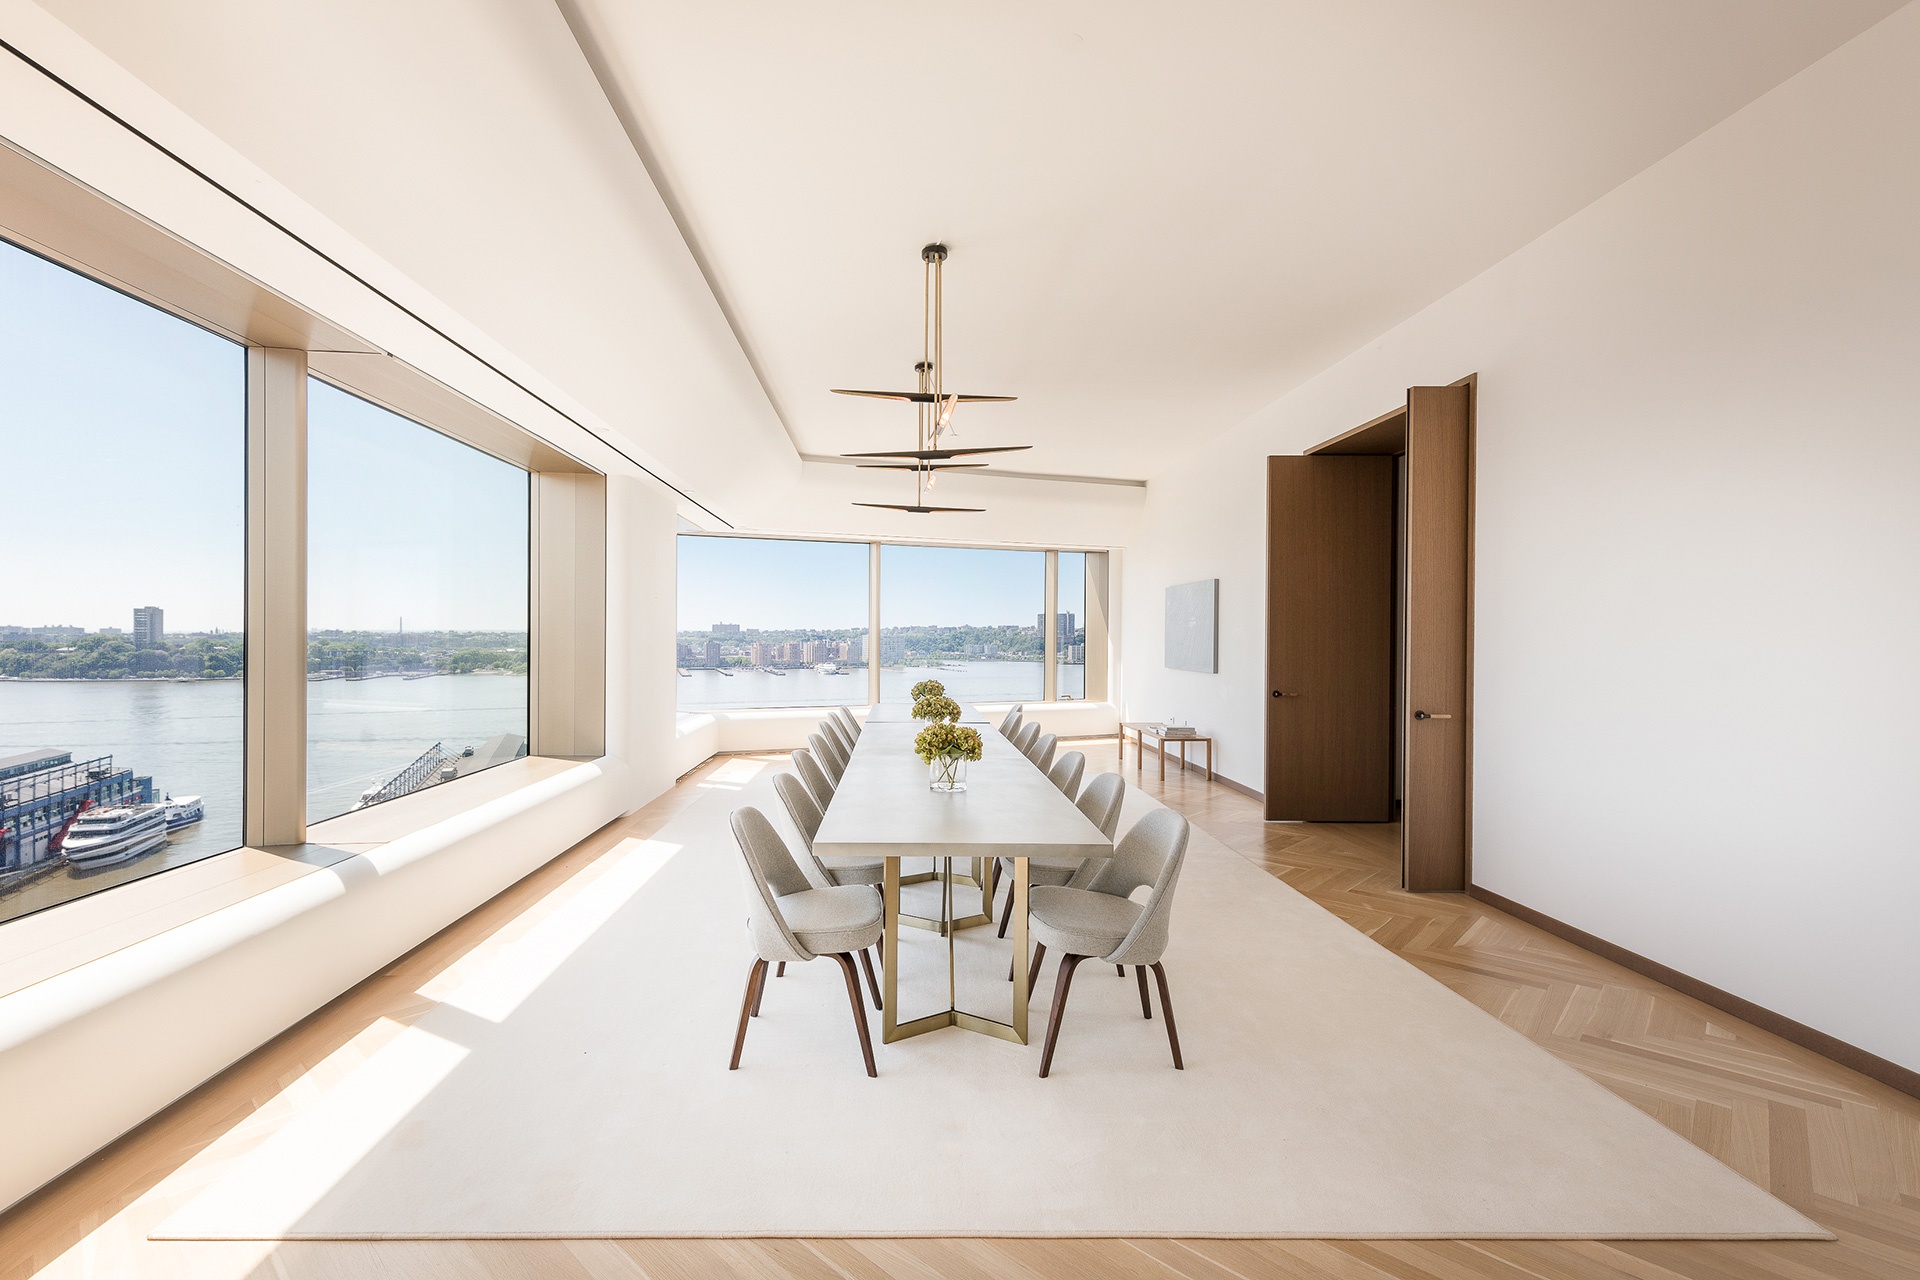 This ultra-luxurious residence overlooks the Hudson River and downtown Manhattan from the 15th floor of the Foster + Partners-designed 551 West 21st Street in West Chelsea—the contemporary art capital of the world.